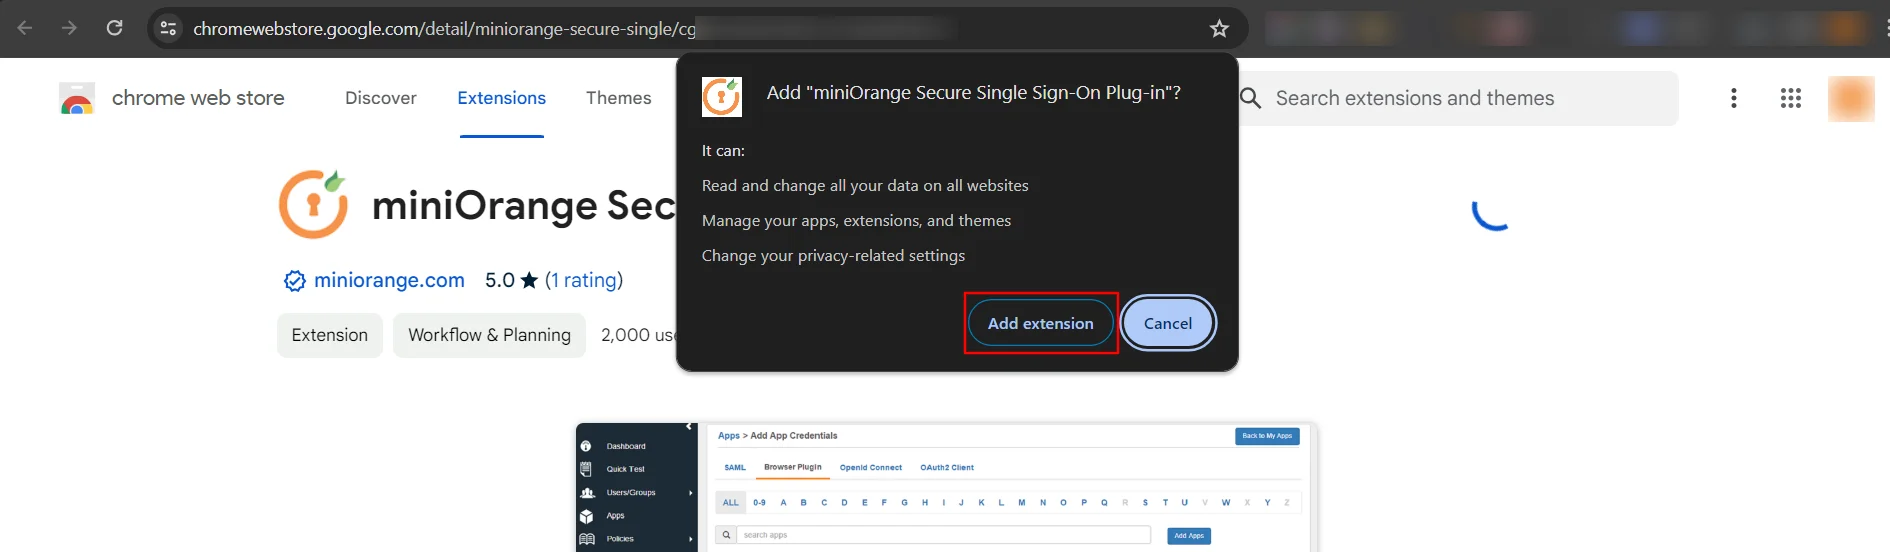 Quickbooks Single Sign-On (sso) extension added in chrome